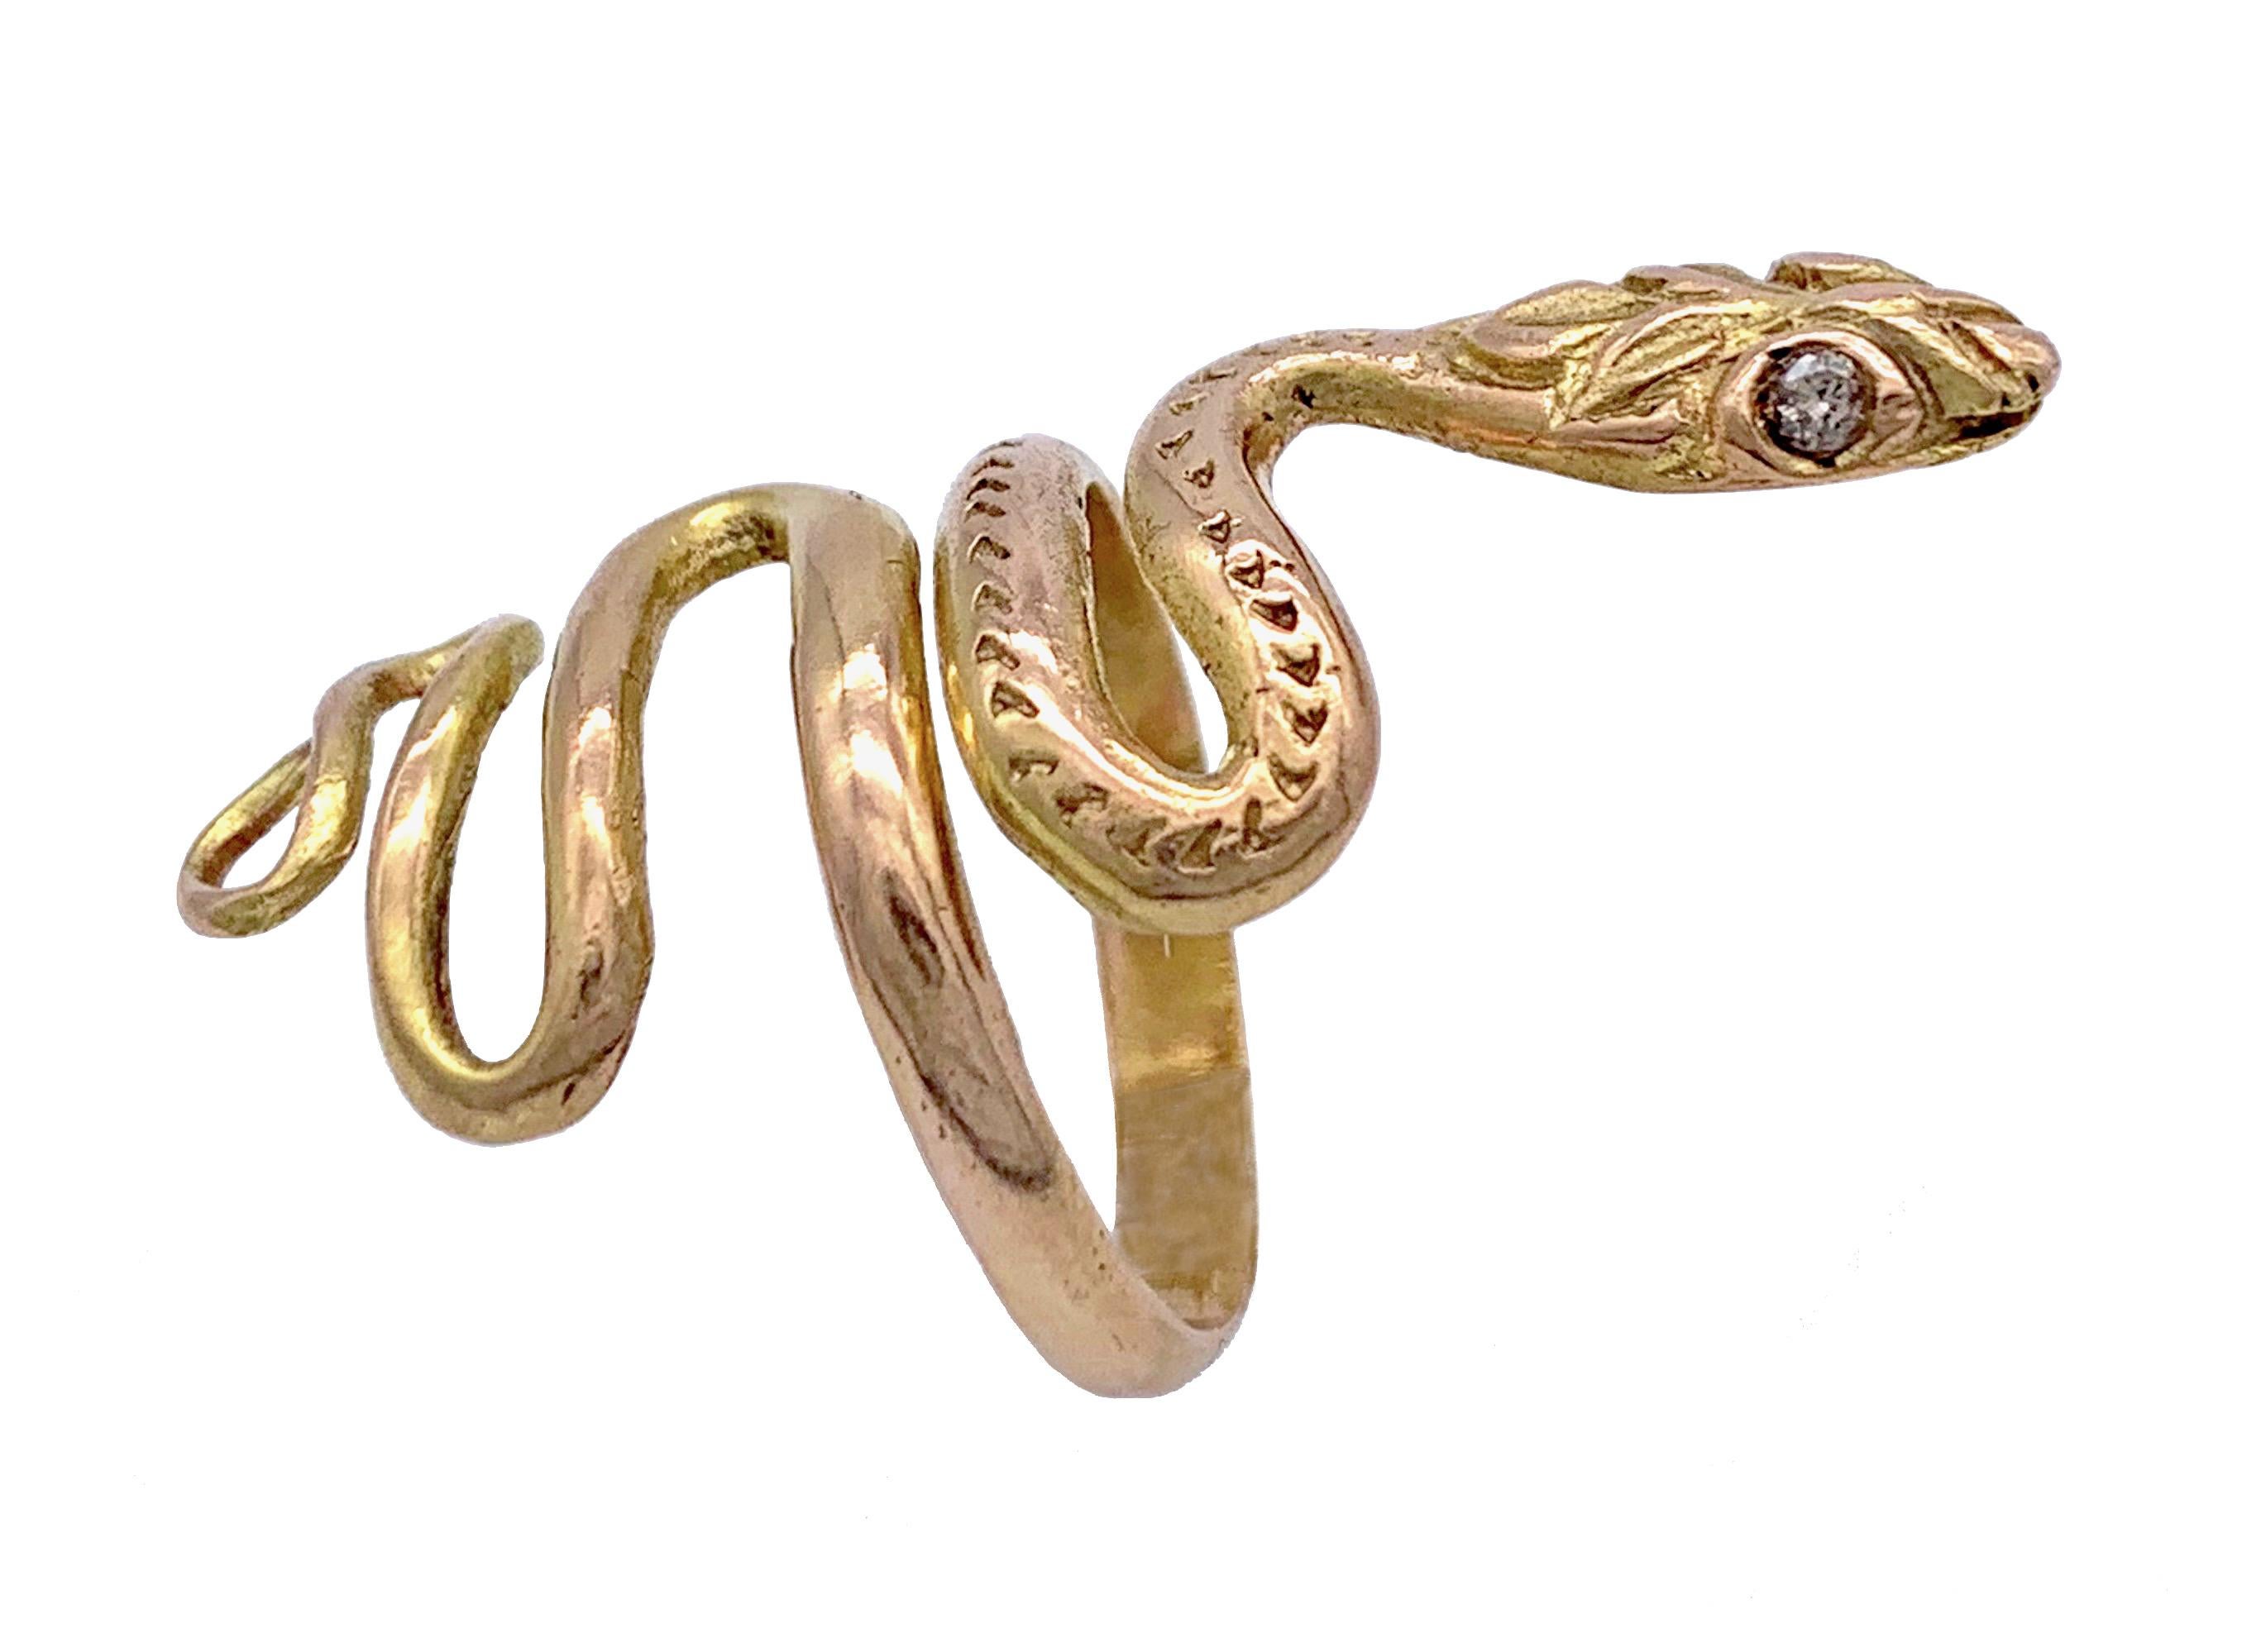 This unusual engraved Belle Époque snake ring will coil around most fingers. It was made in the 1880`s in Italy out of 10 karat gold. Two small diamonds give sparkle to the snake's eyes. 